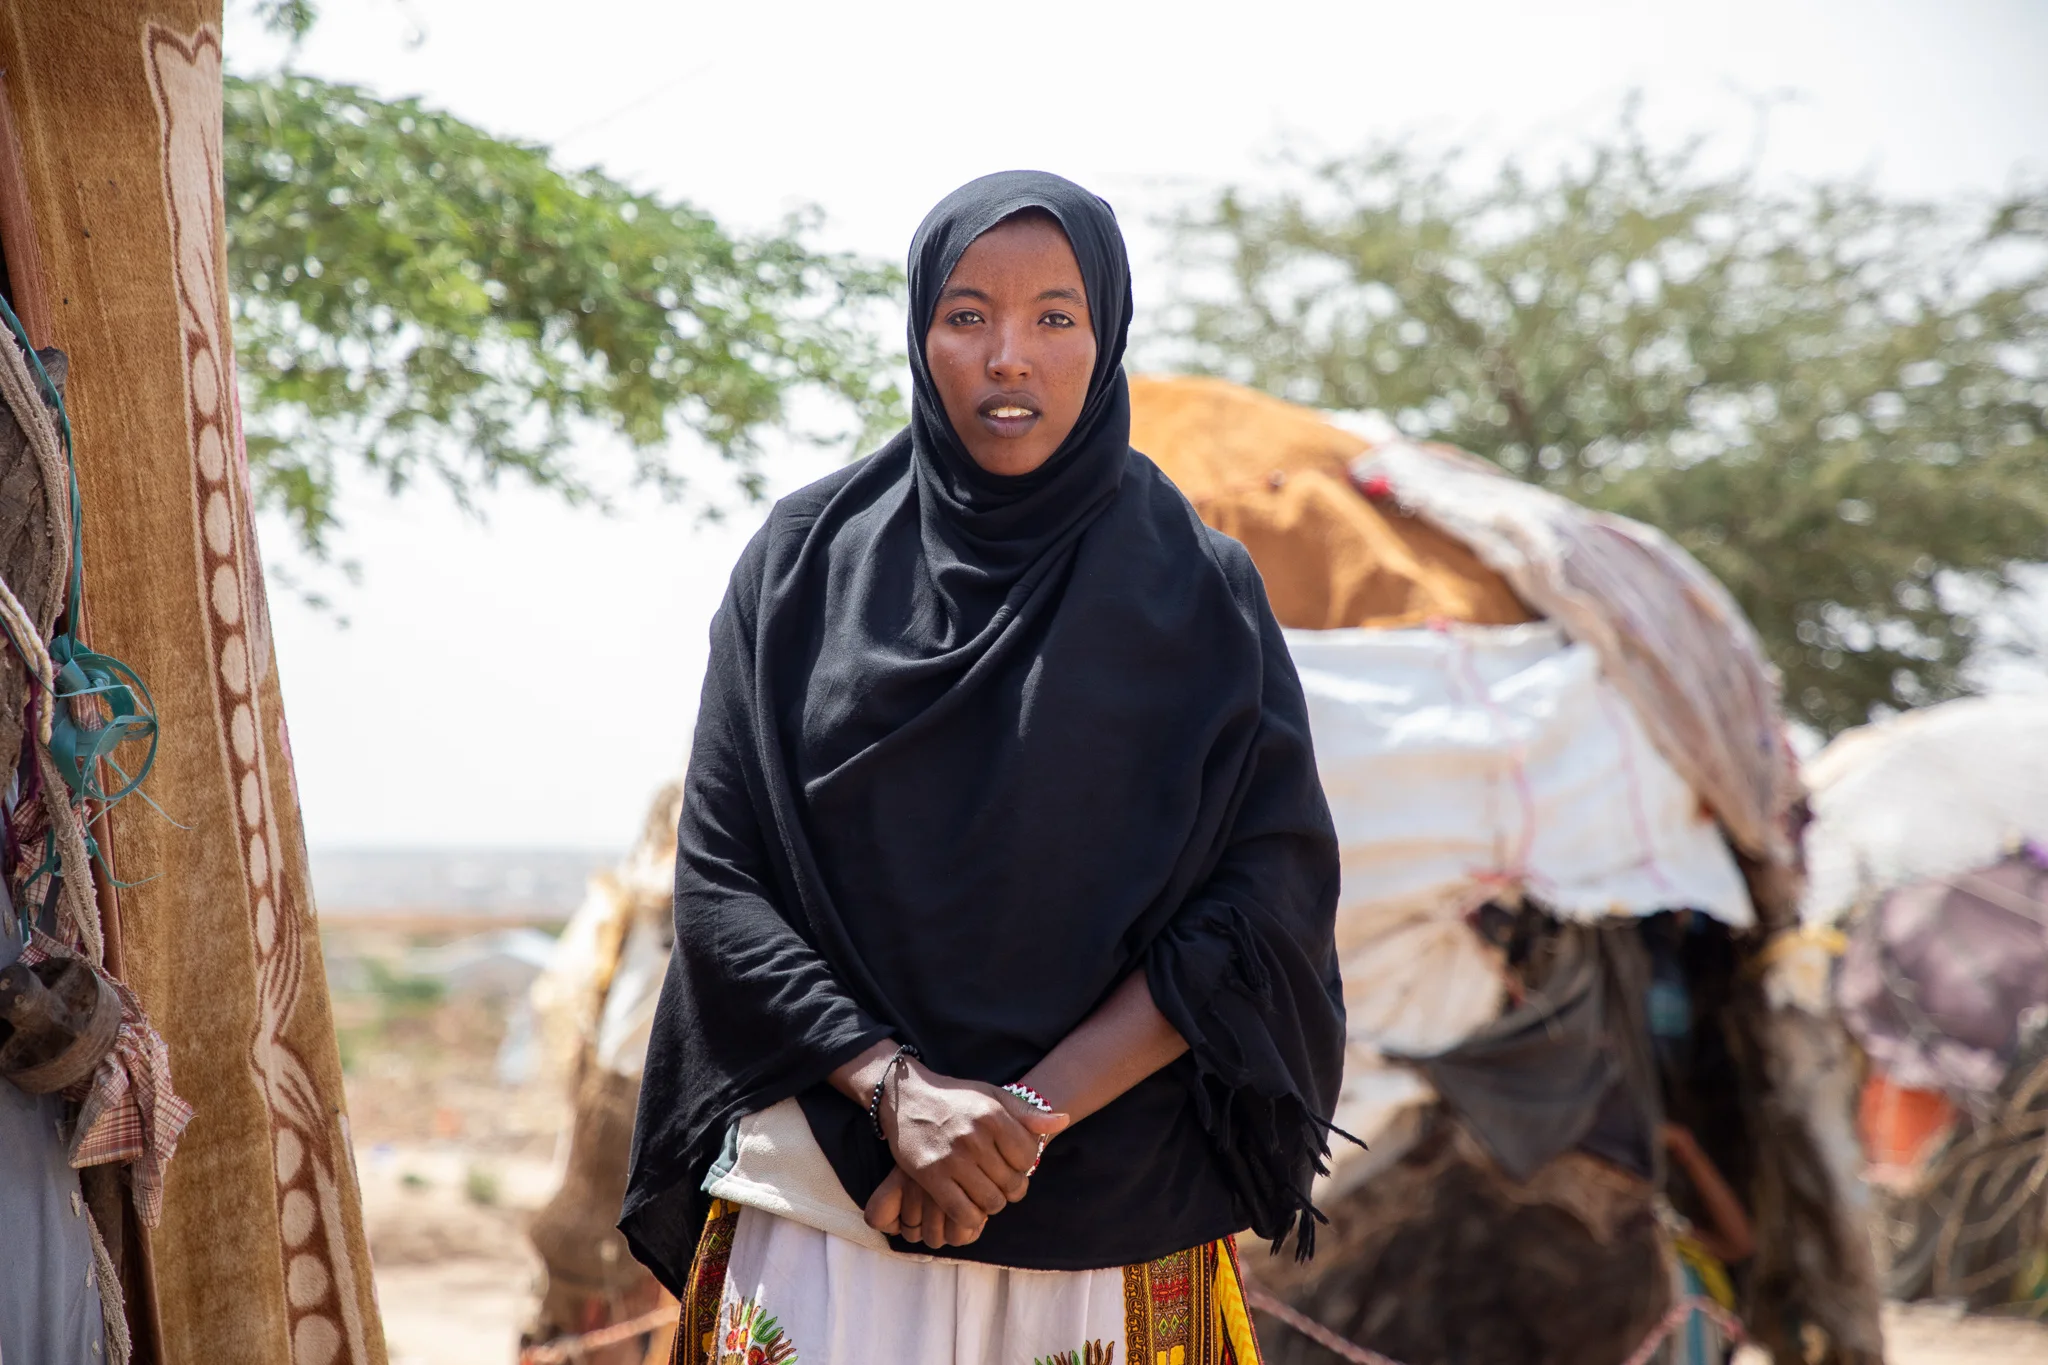 Portrait of a person in a displacement camp in Somalia.